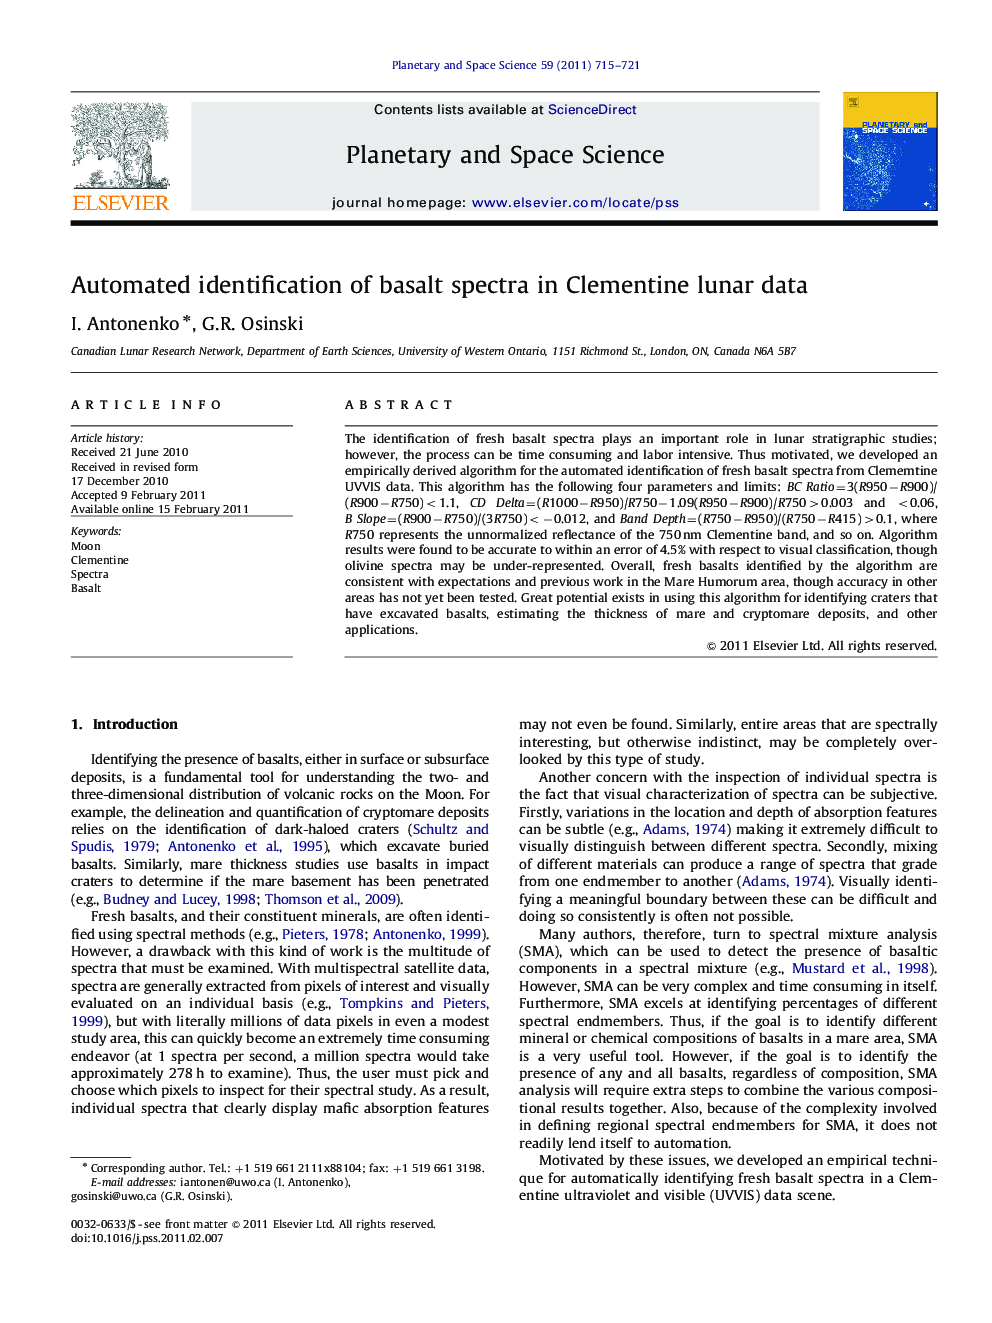 Automated identification of basalt spectra in Clementine lunar data